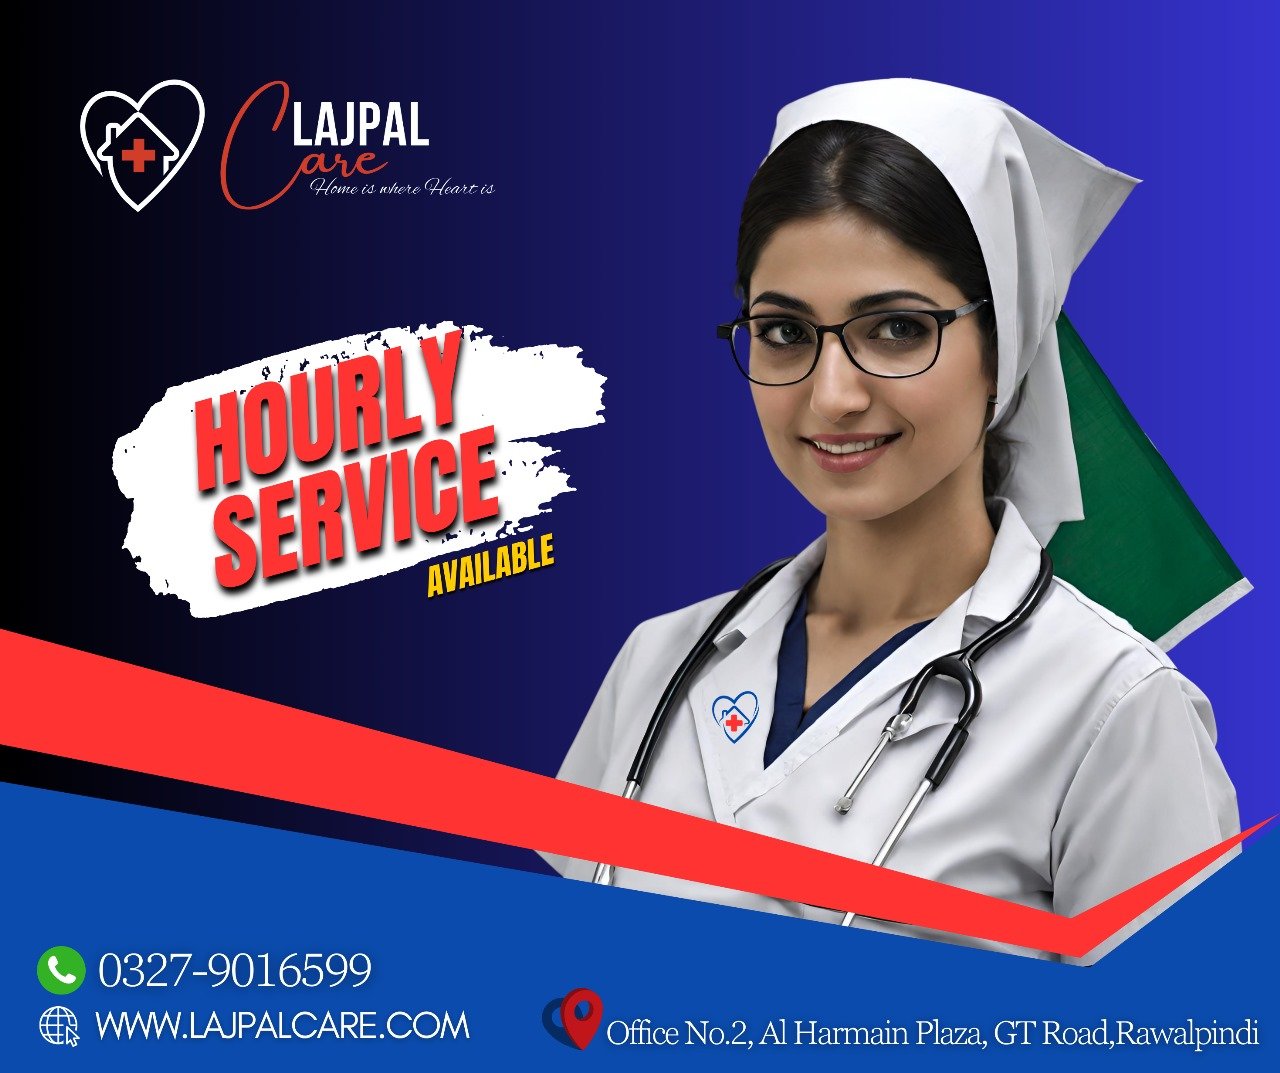 Patient Care at Home Services Available 12 Hours or 24 Hours